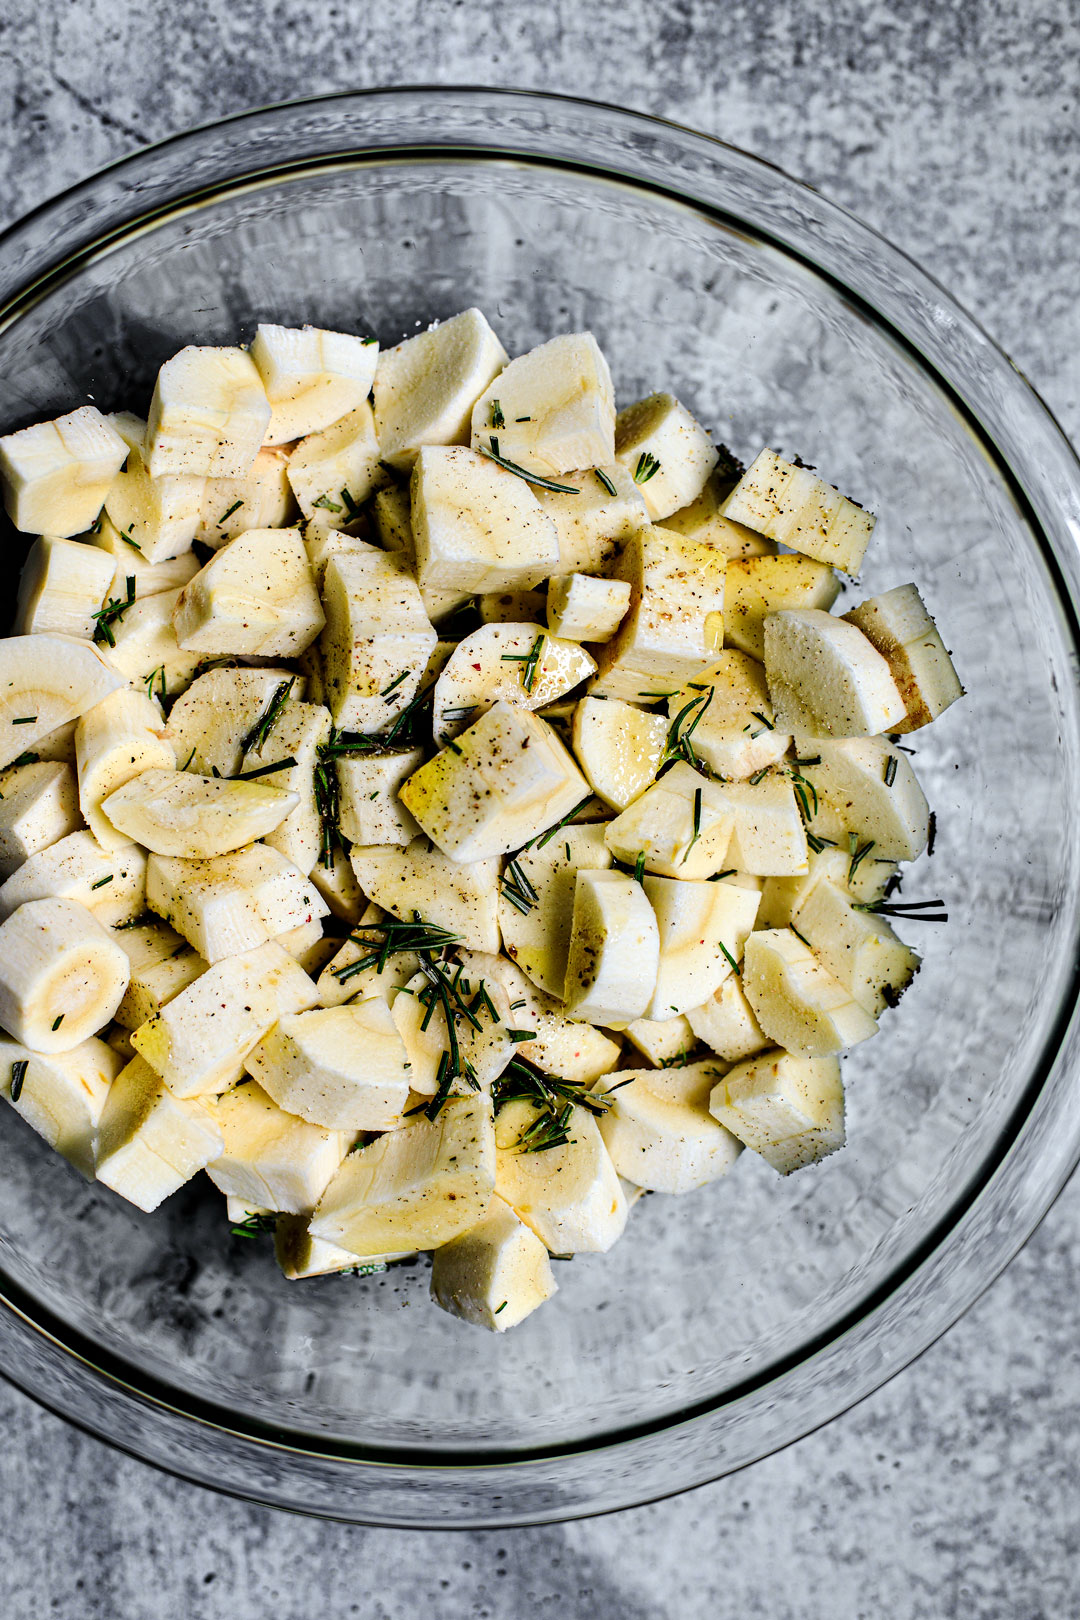 Bowl of cubed parsnips with olive oil and rosemary.